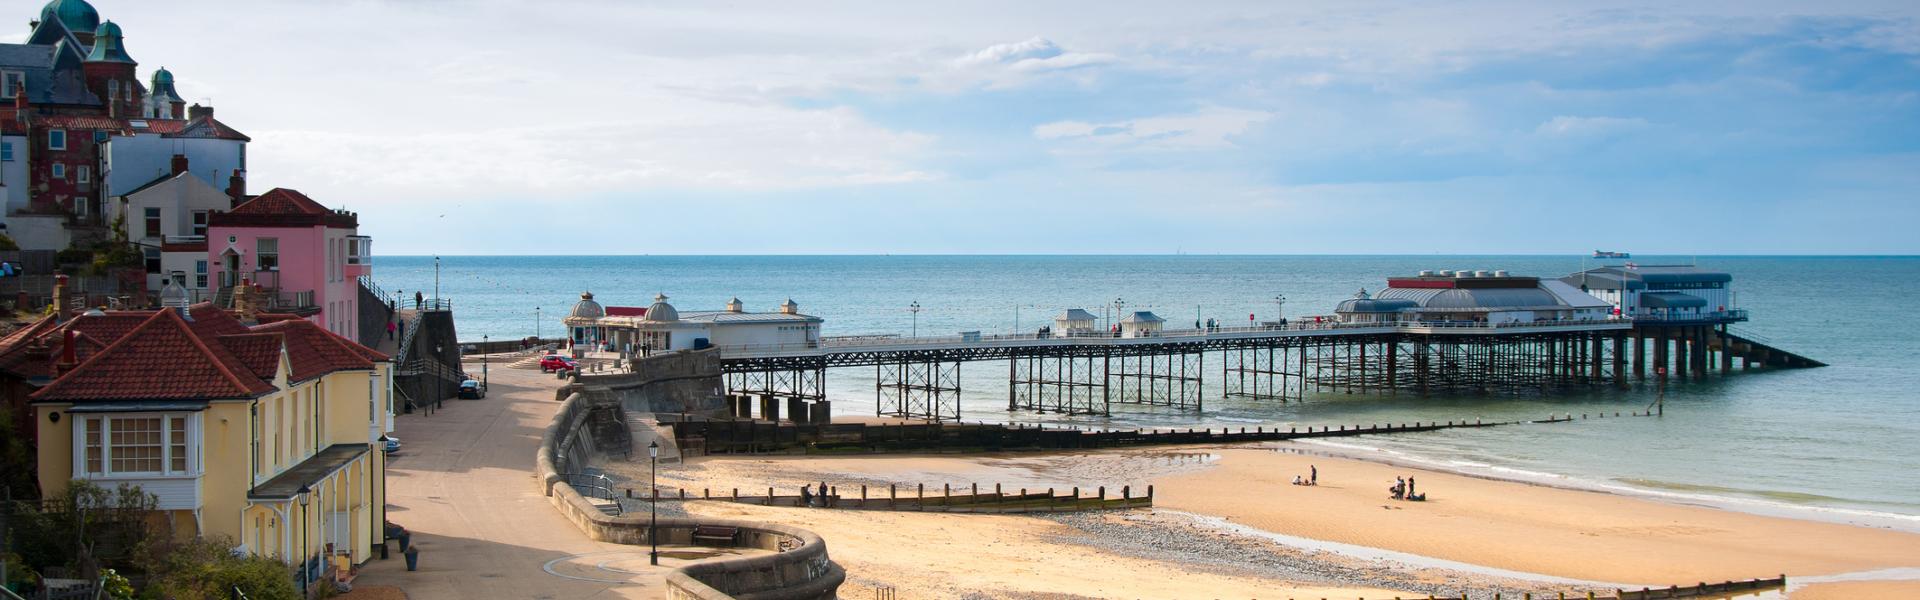 Holiday lettings & accommodation in Bacton - HomeToGo